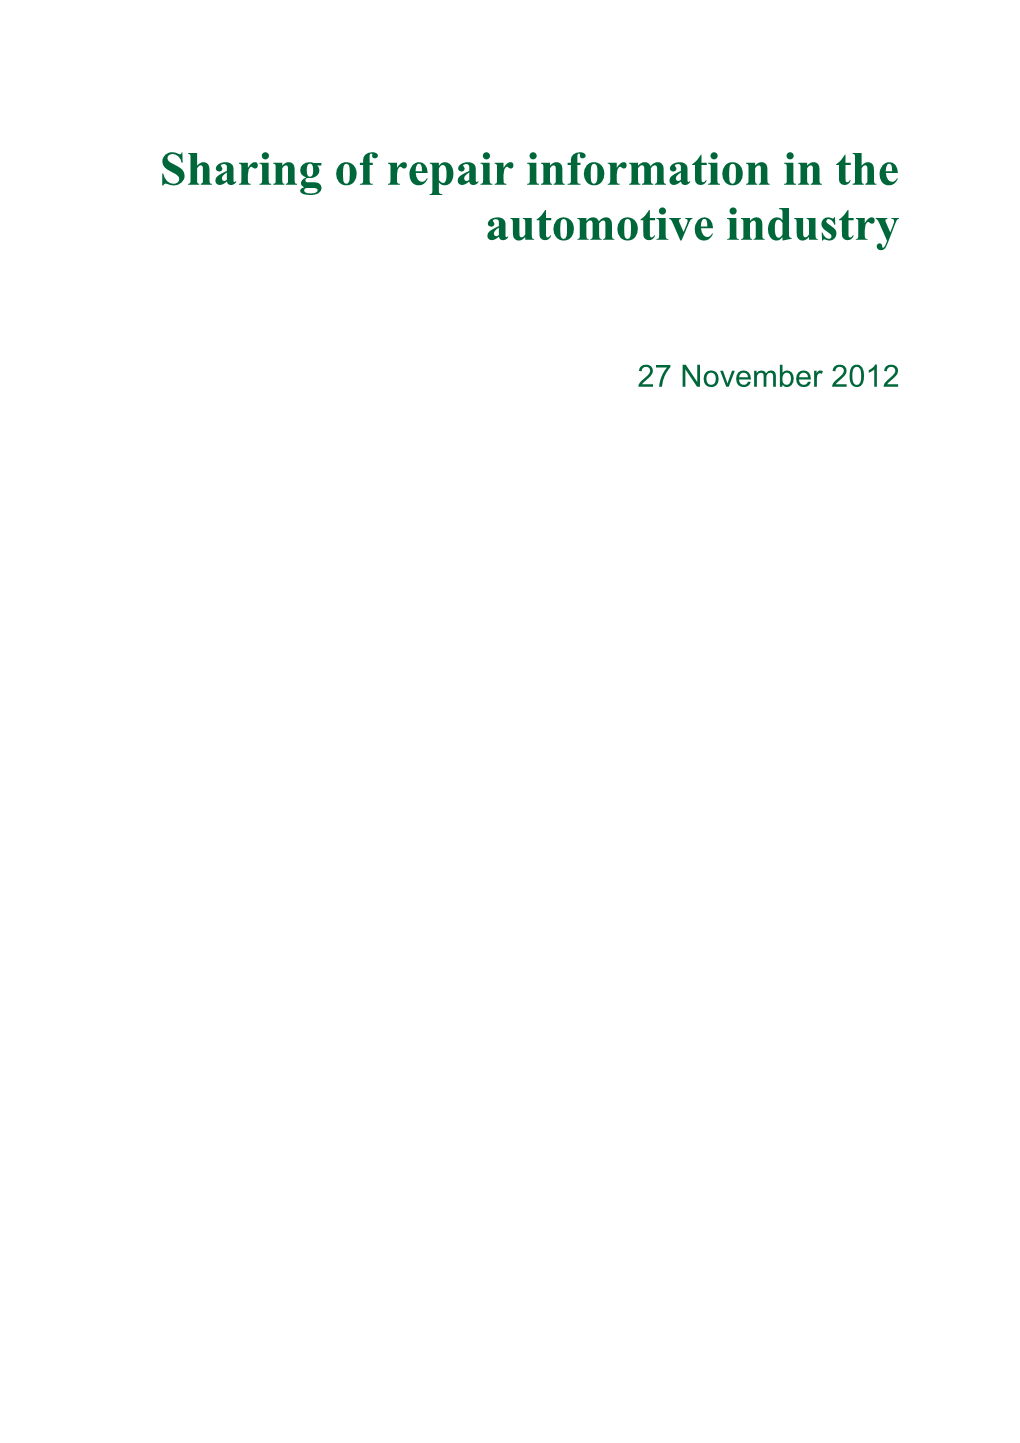 Sharing of Repair Information in the Automotive Industry